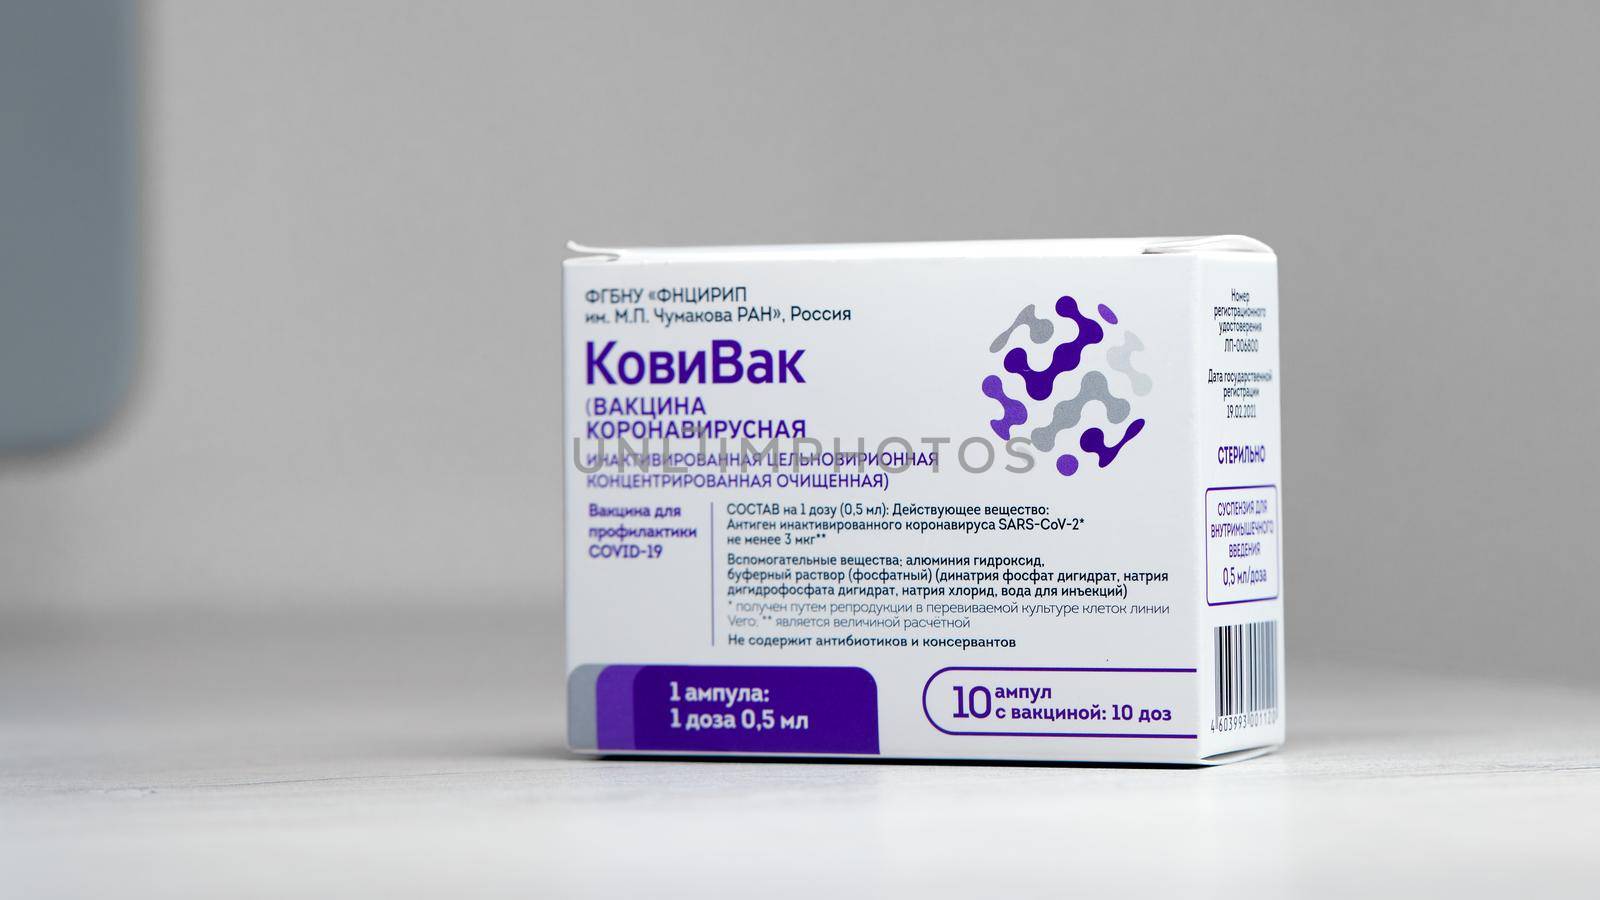 Box with new Russian vaccine against coronavirus SARS-CoV-2, CoviVac. CoviVac is developed by the Chumakov Centre. Vaccine for prevention COVID-19. 26.08.2021, Moscow, Russia by EvgeniyQW